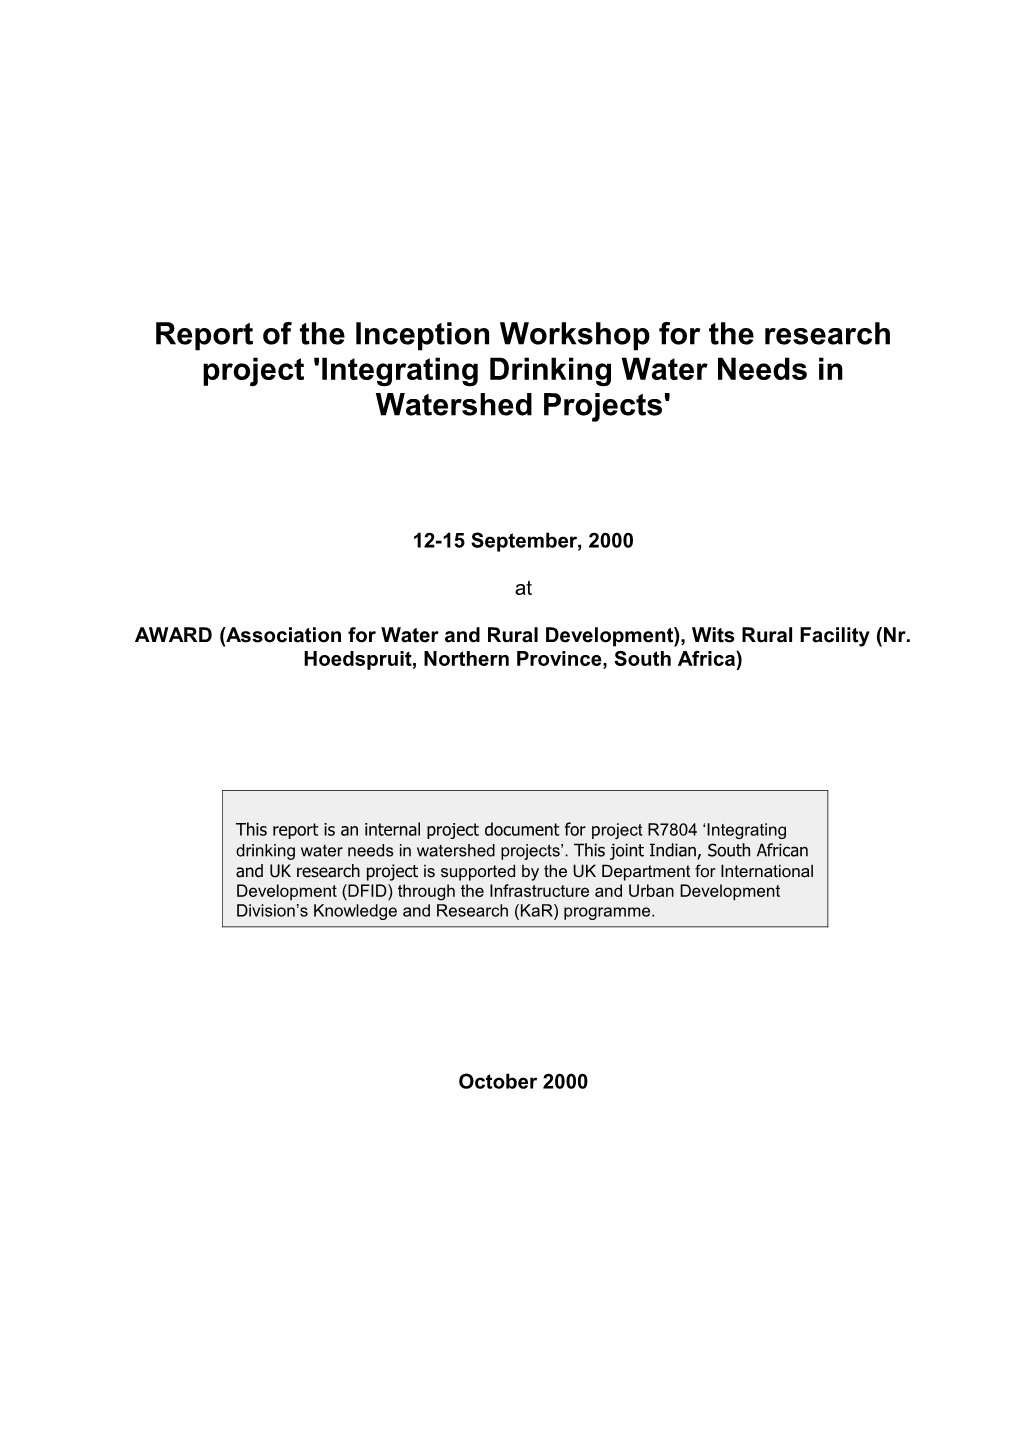 Report of the Inception Workshop for the Research Project 'Integrating Drinking Water Needs